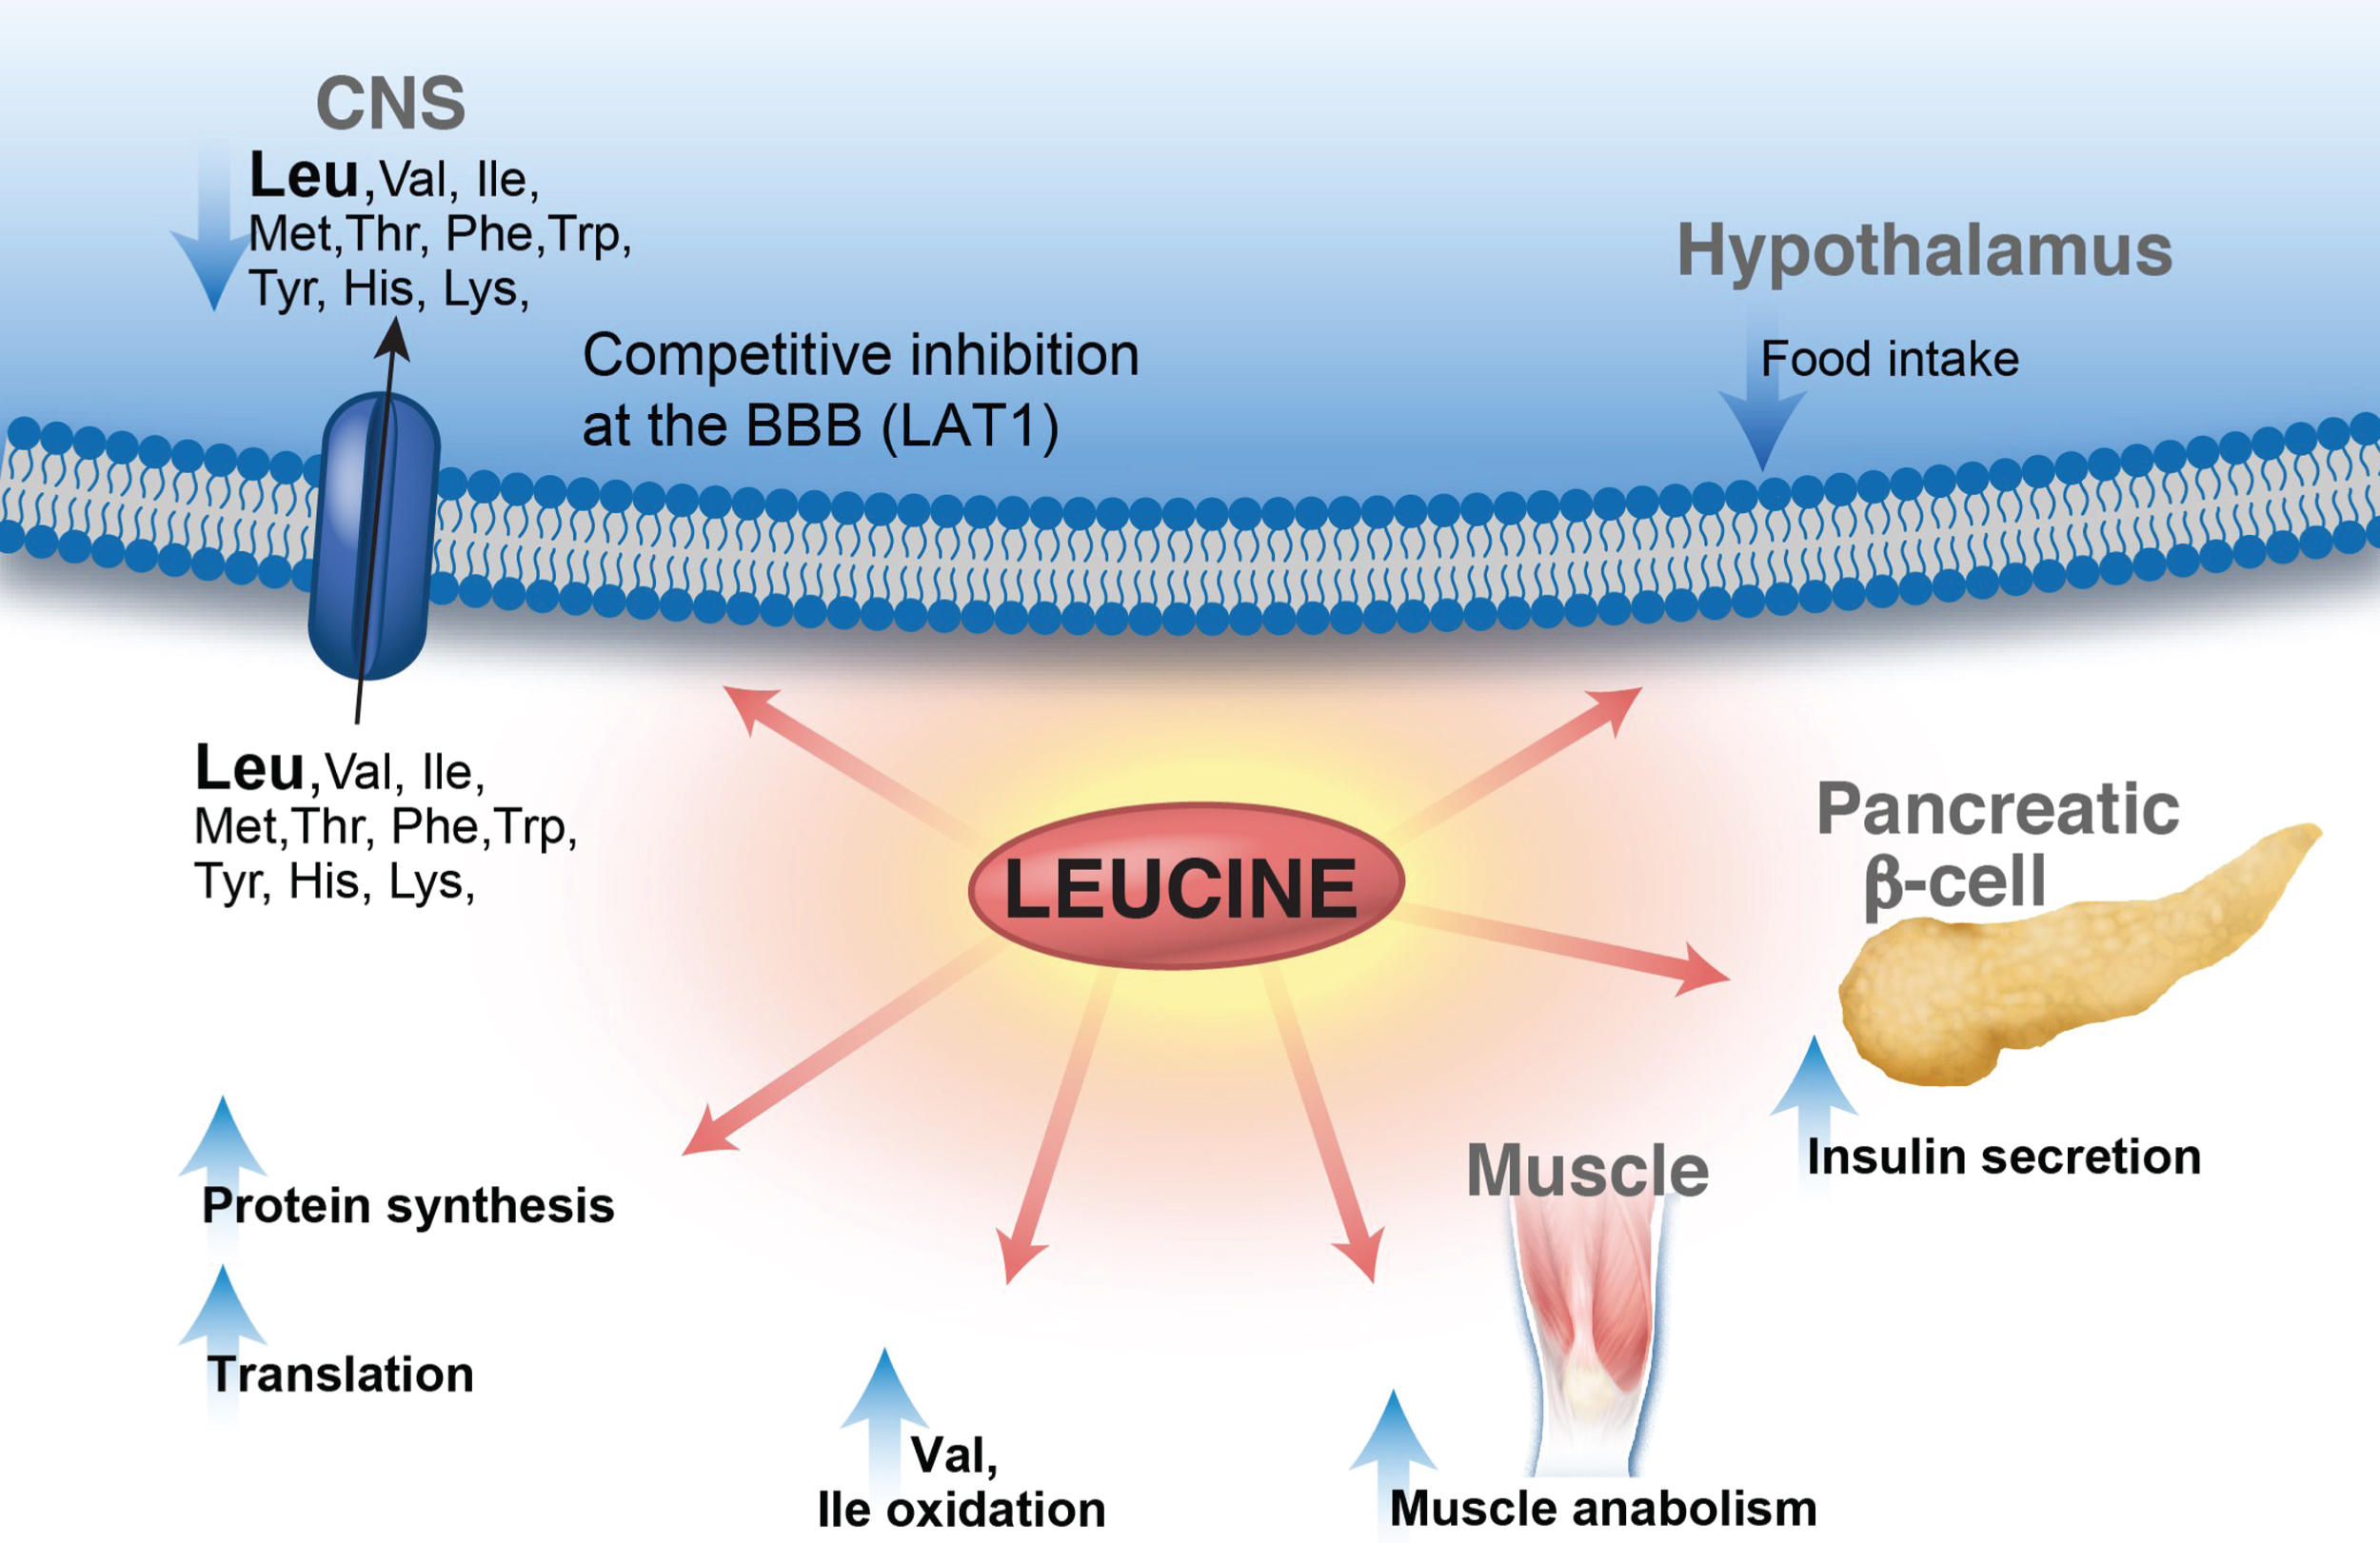 Leucine metabolic effects in multiple organ systems. Leucine displays a multitude of effects in various organs: enhances protein synthesis, inhibits muscle protein breakdown, stimulates insulin secretion and plays a role in central nervous system food intake regulatory circuits and feeding behavior. Leucine is transported via the large neutral amino acid transporter LAT1 at the blood–brain barrier, among other transporters, and can compete with other large neutral amino acids for uptake/transport affecting neurotransmitter biosynthesis. Lastly, leucine-derived α-ketoisocaproate is a potent inhibitor of the branched-chain ketoacid dehydrogenase-kinase resulting in activation of branched-chain ketoacid dehydrogenase and increased BCAA (valine and isoleucine) oxidation.